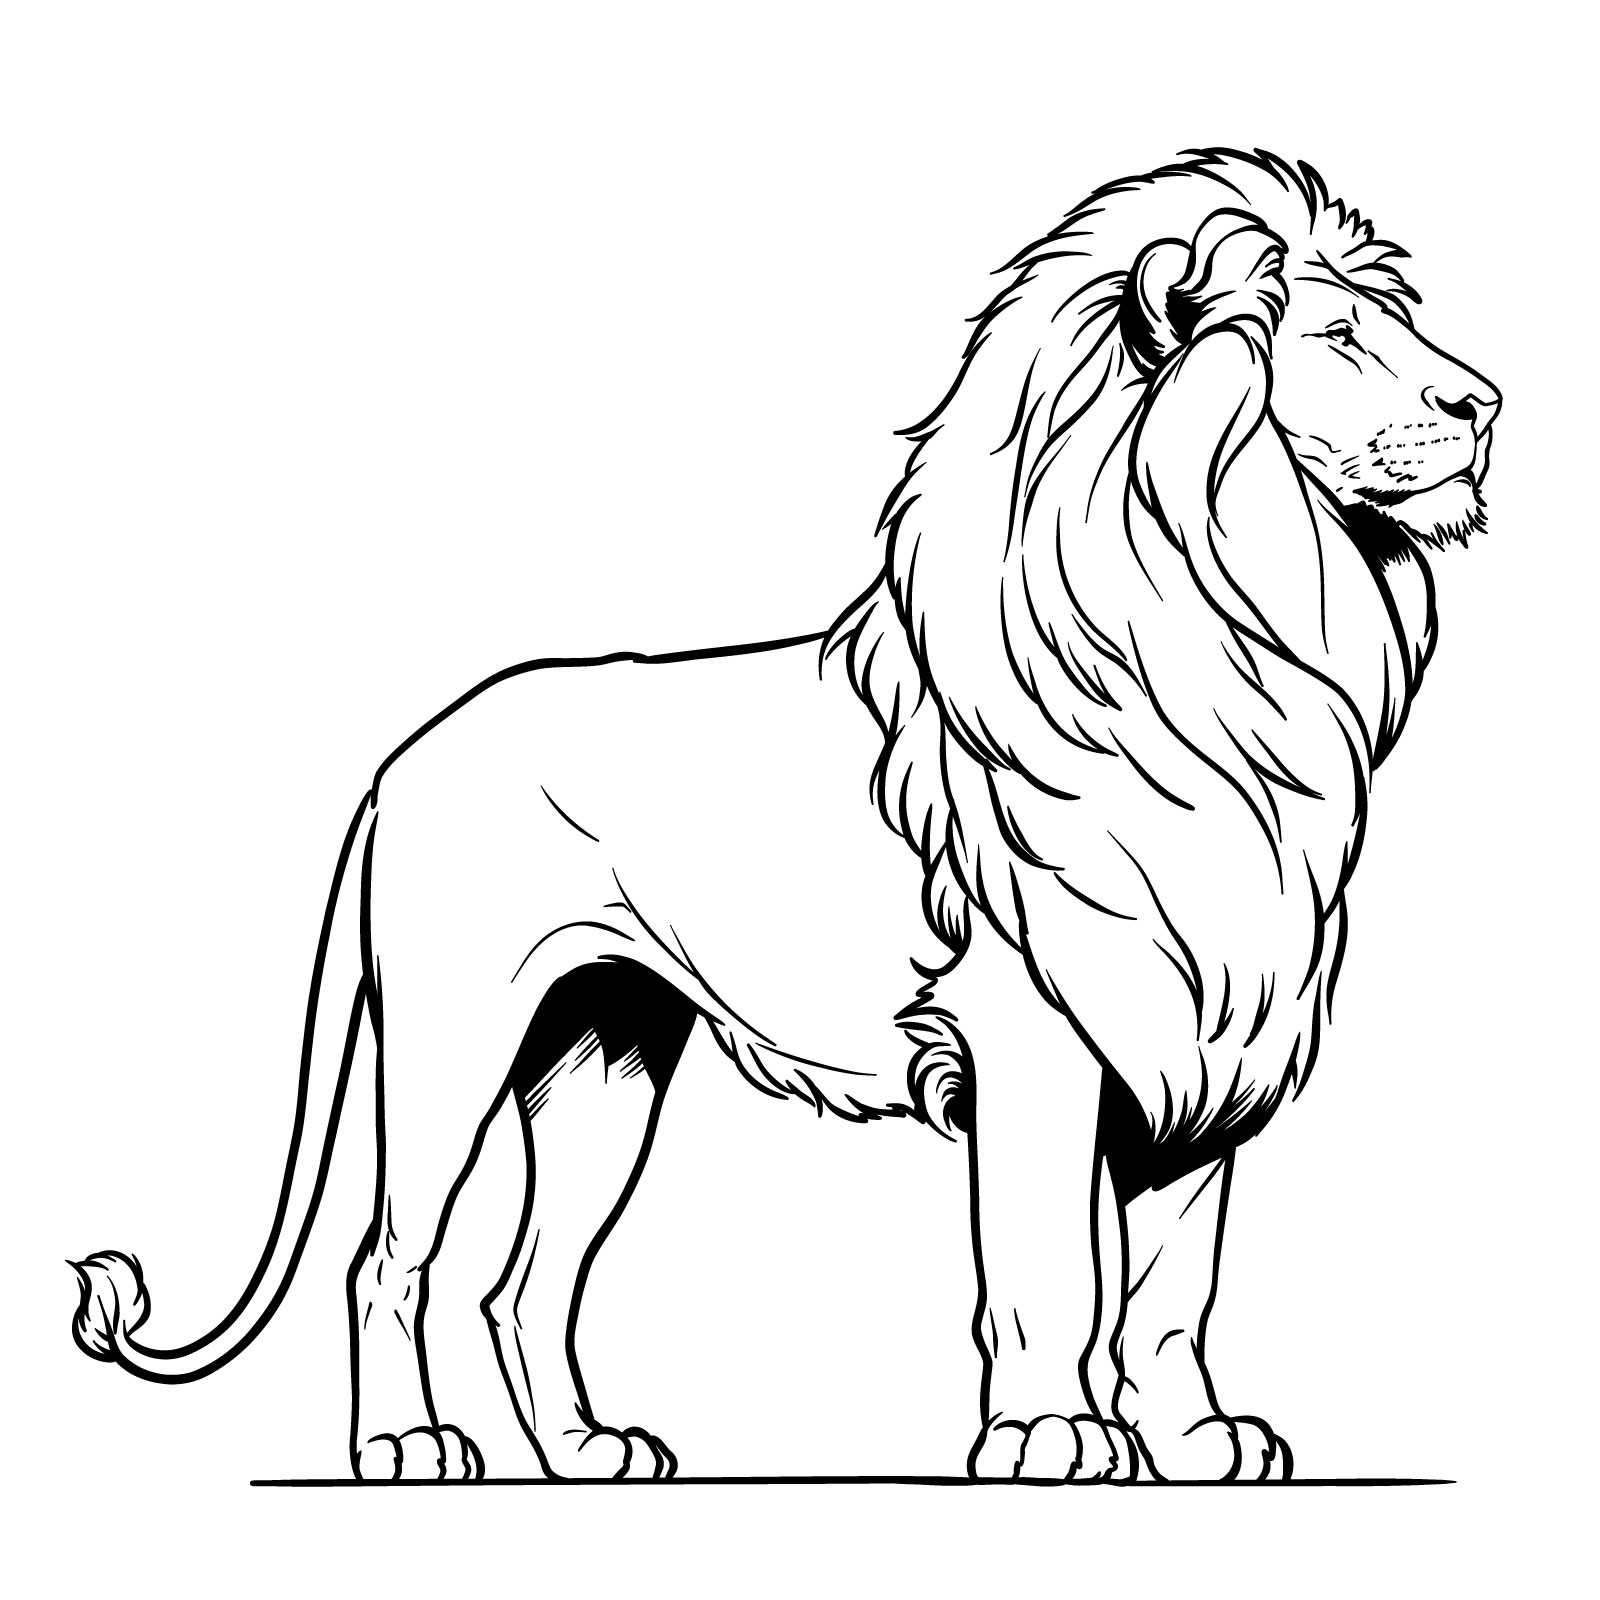 Finished piece of the step-by-step guide on how to draw a realistic standing lion in side view